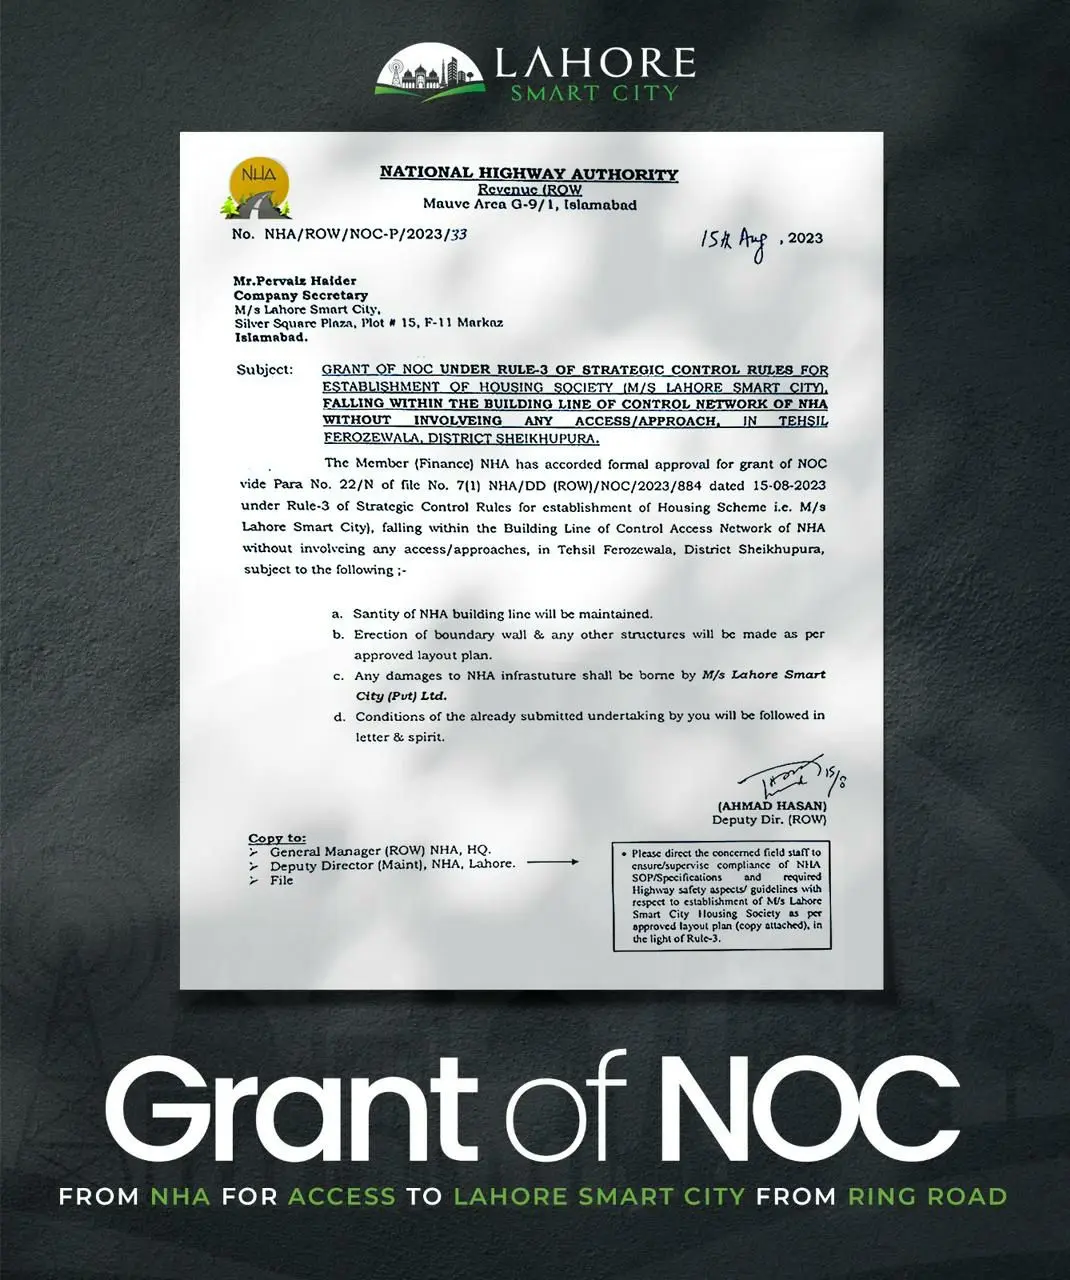 NHA grants an NOC to LSC for direct access to the Lahore Ring Road.